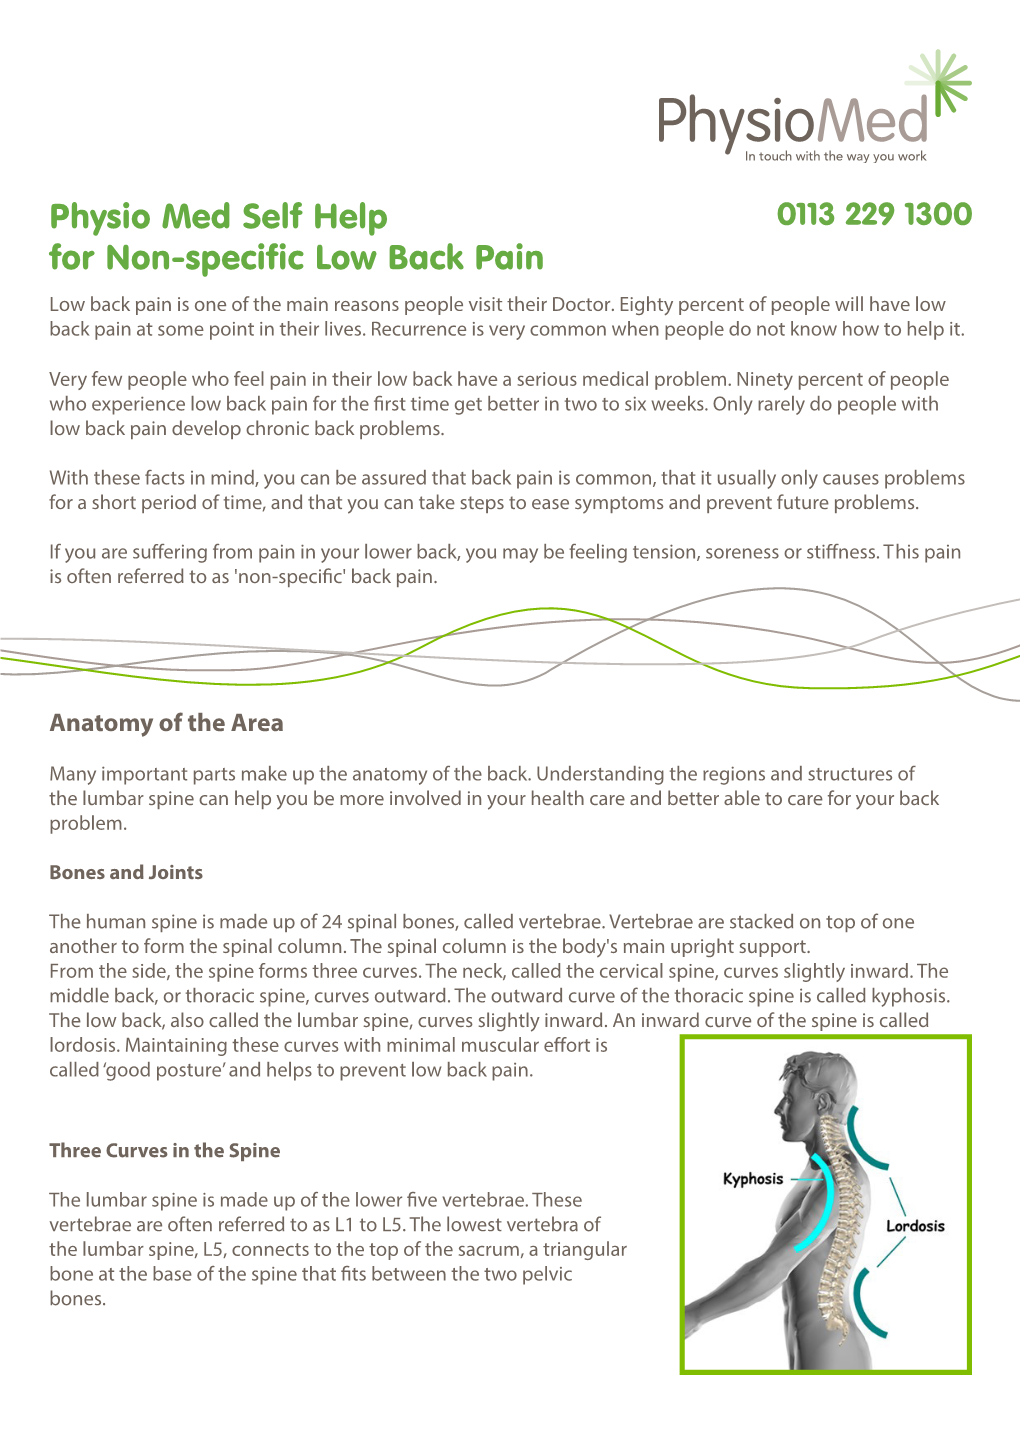 Physio Med Self Help for Non-Specific Low Back Pain